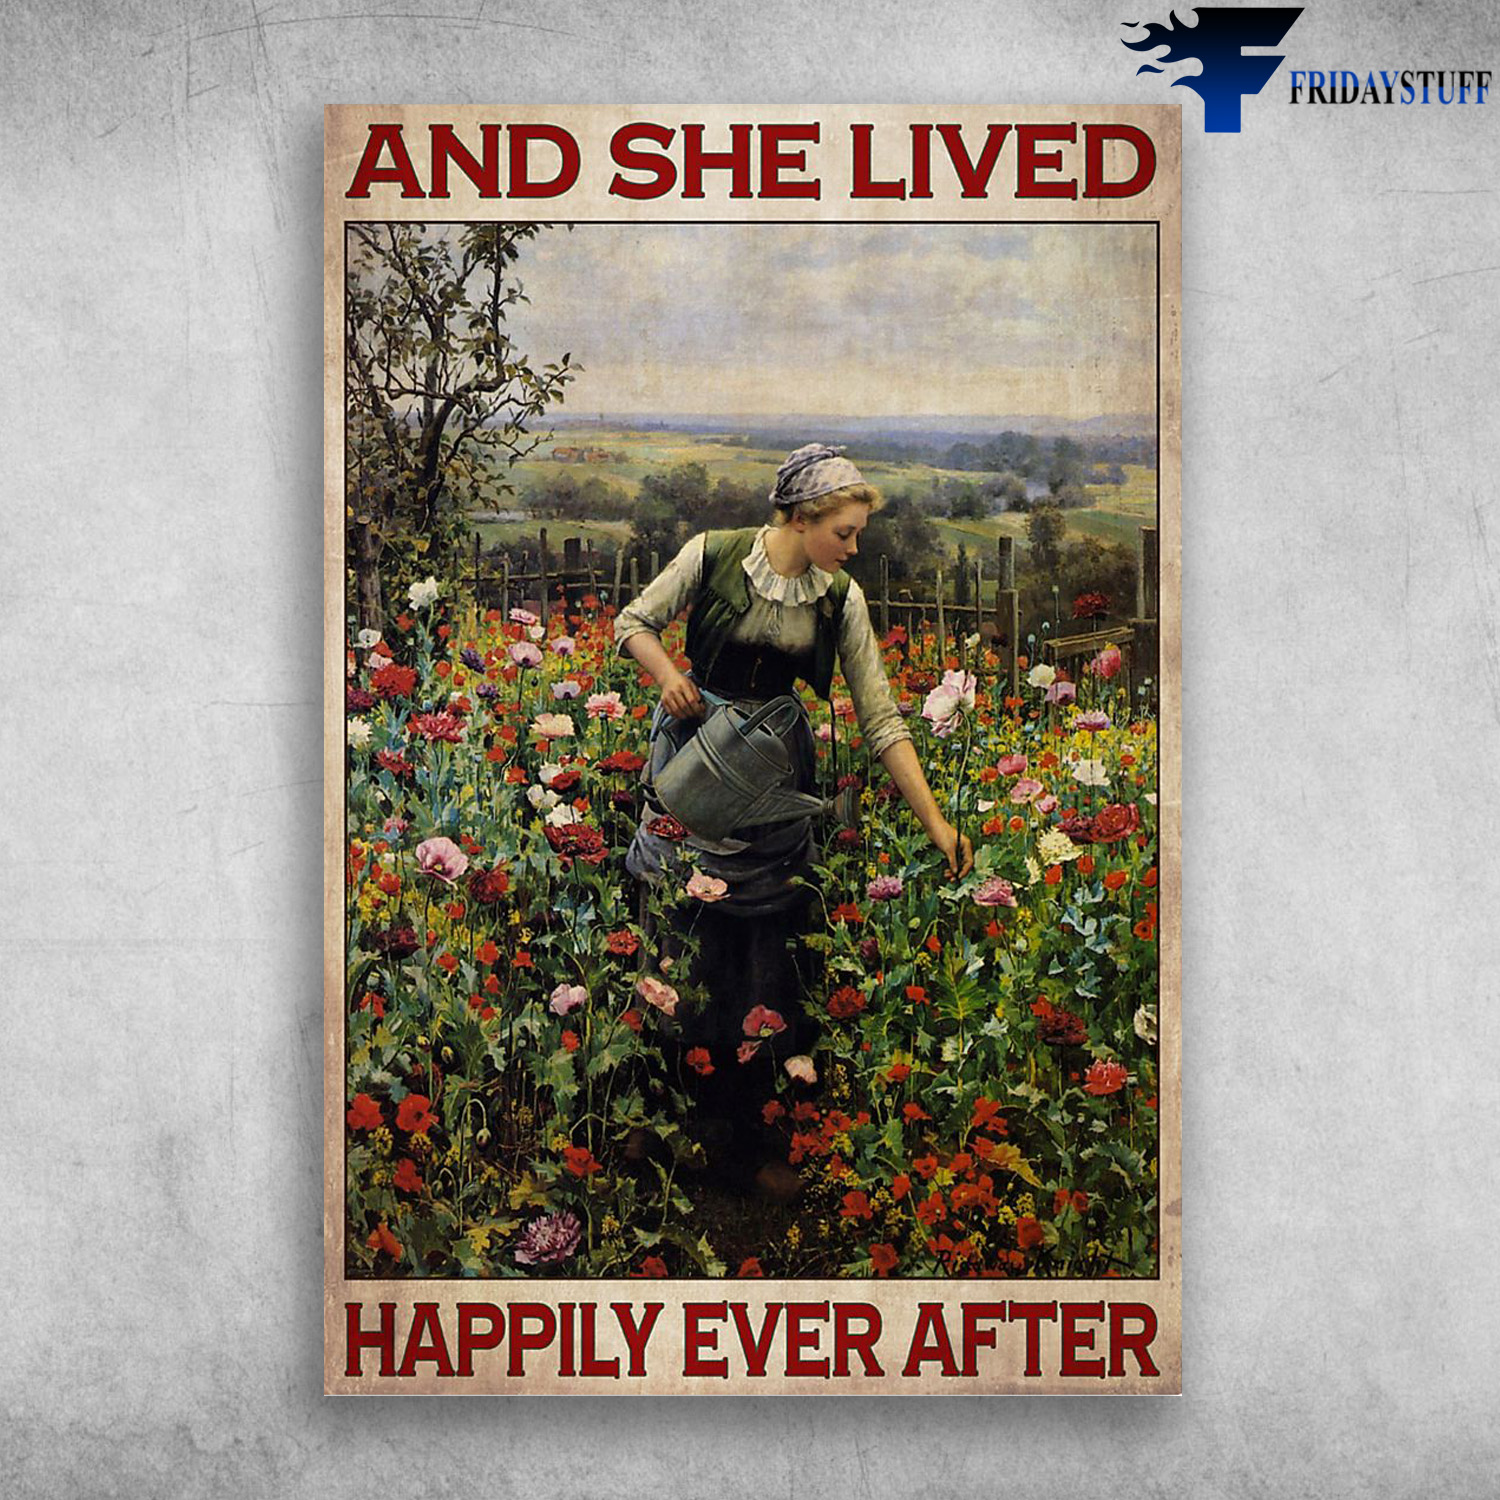 Girl Loves Gardening - And She Lived, Happily Ever After